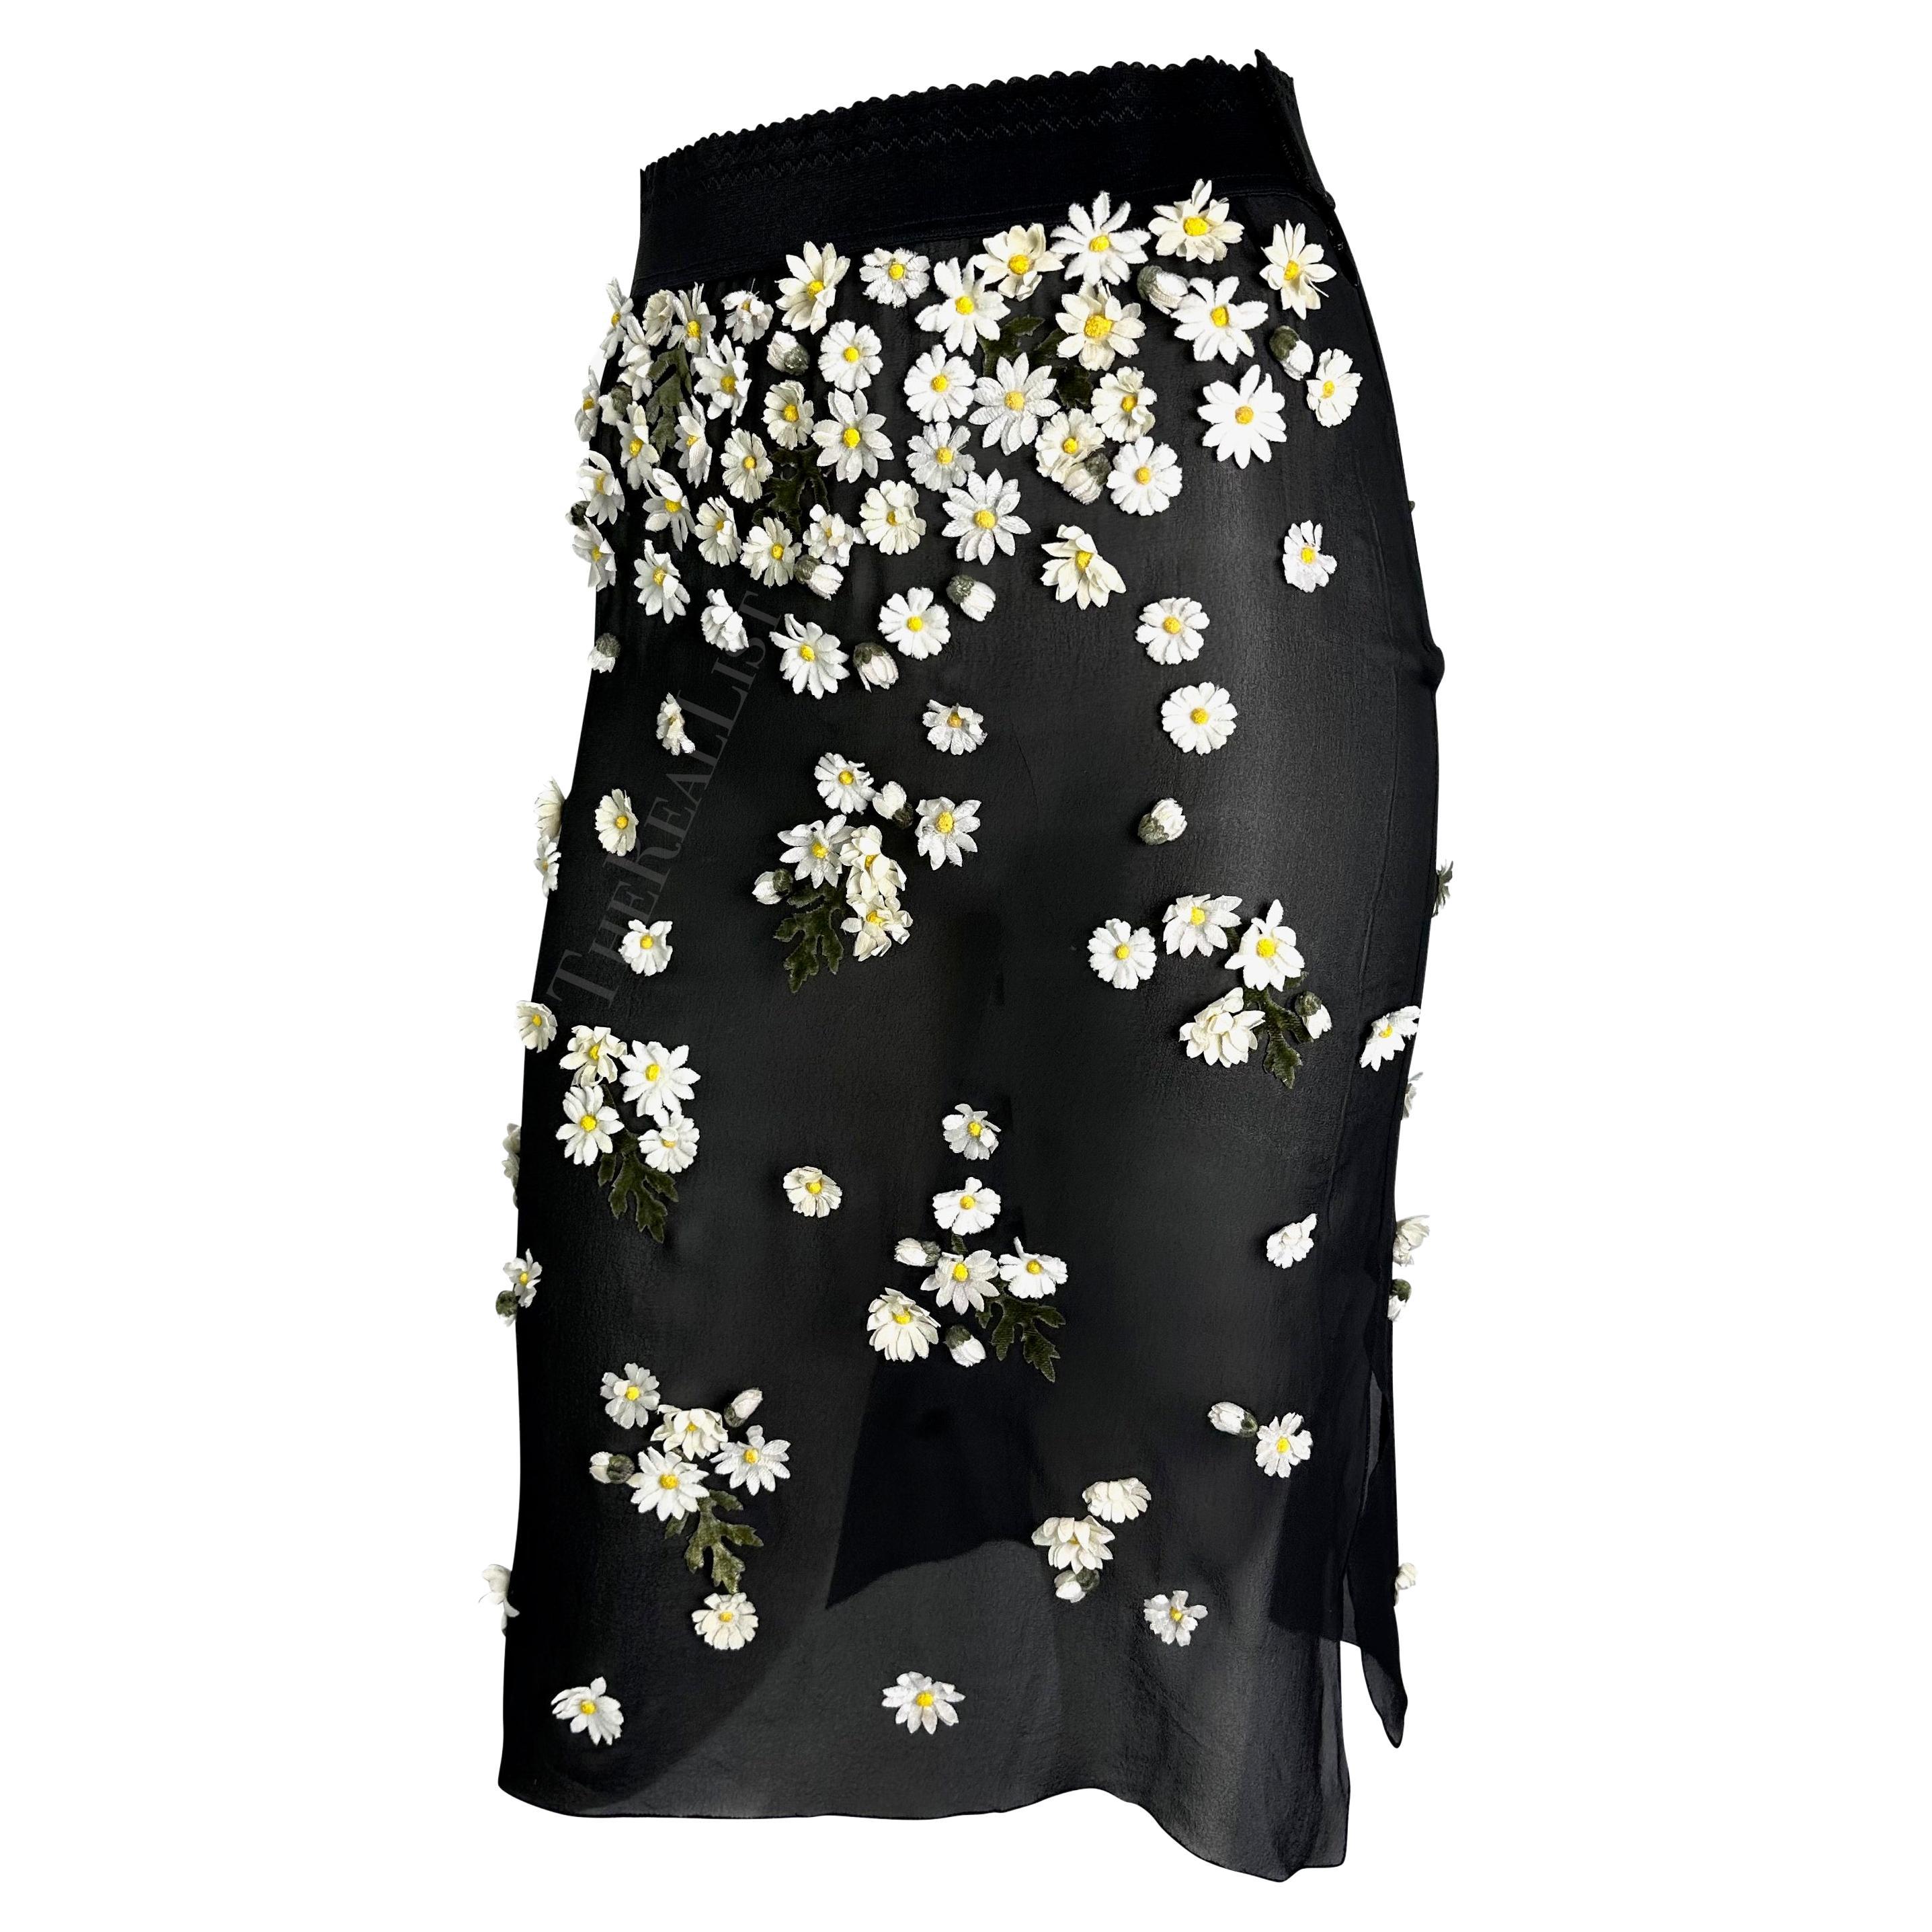 F/W 1999 Dolce & Gabbana Runway Daisy Flower Appliqué Sheer Black Slit Skirt  In Good Condition For Sale In West Hollywood, CA